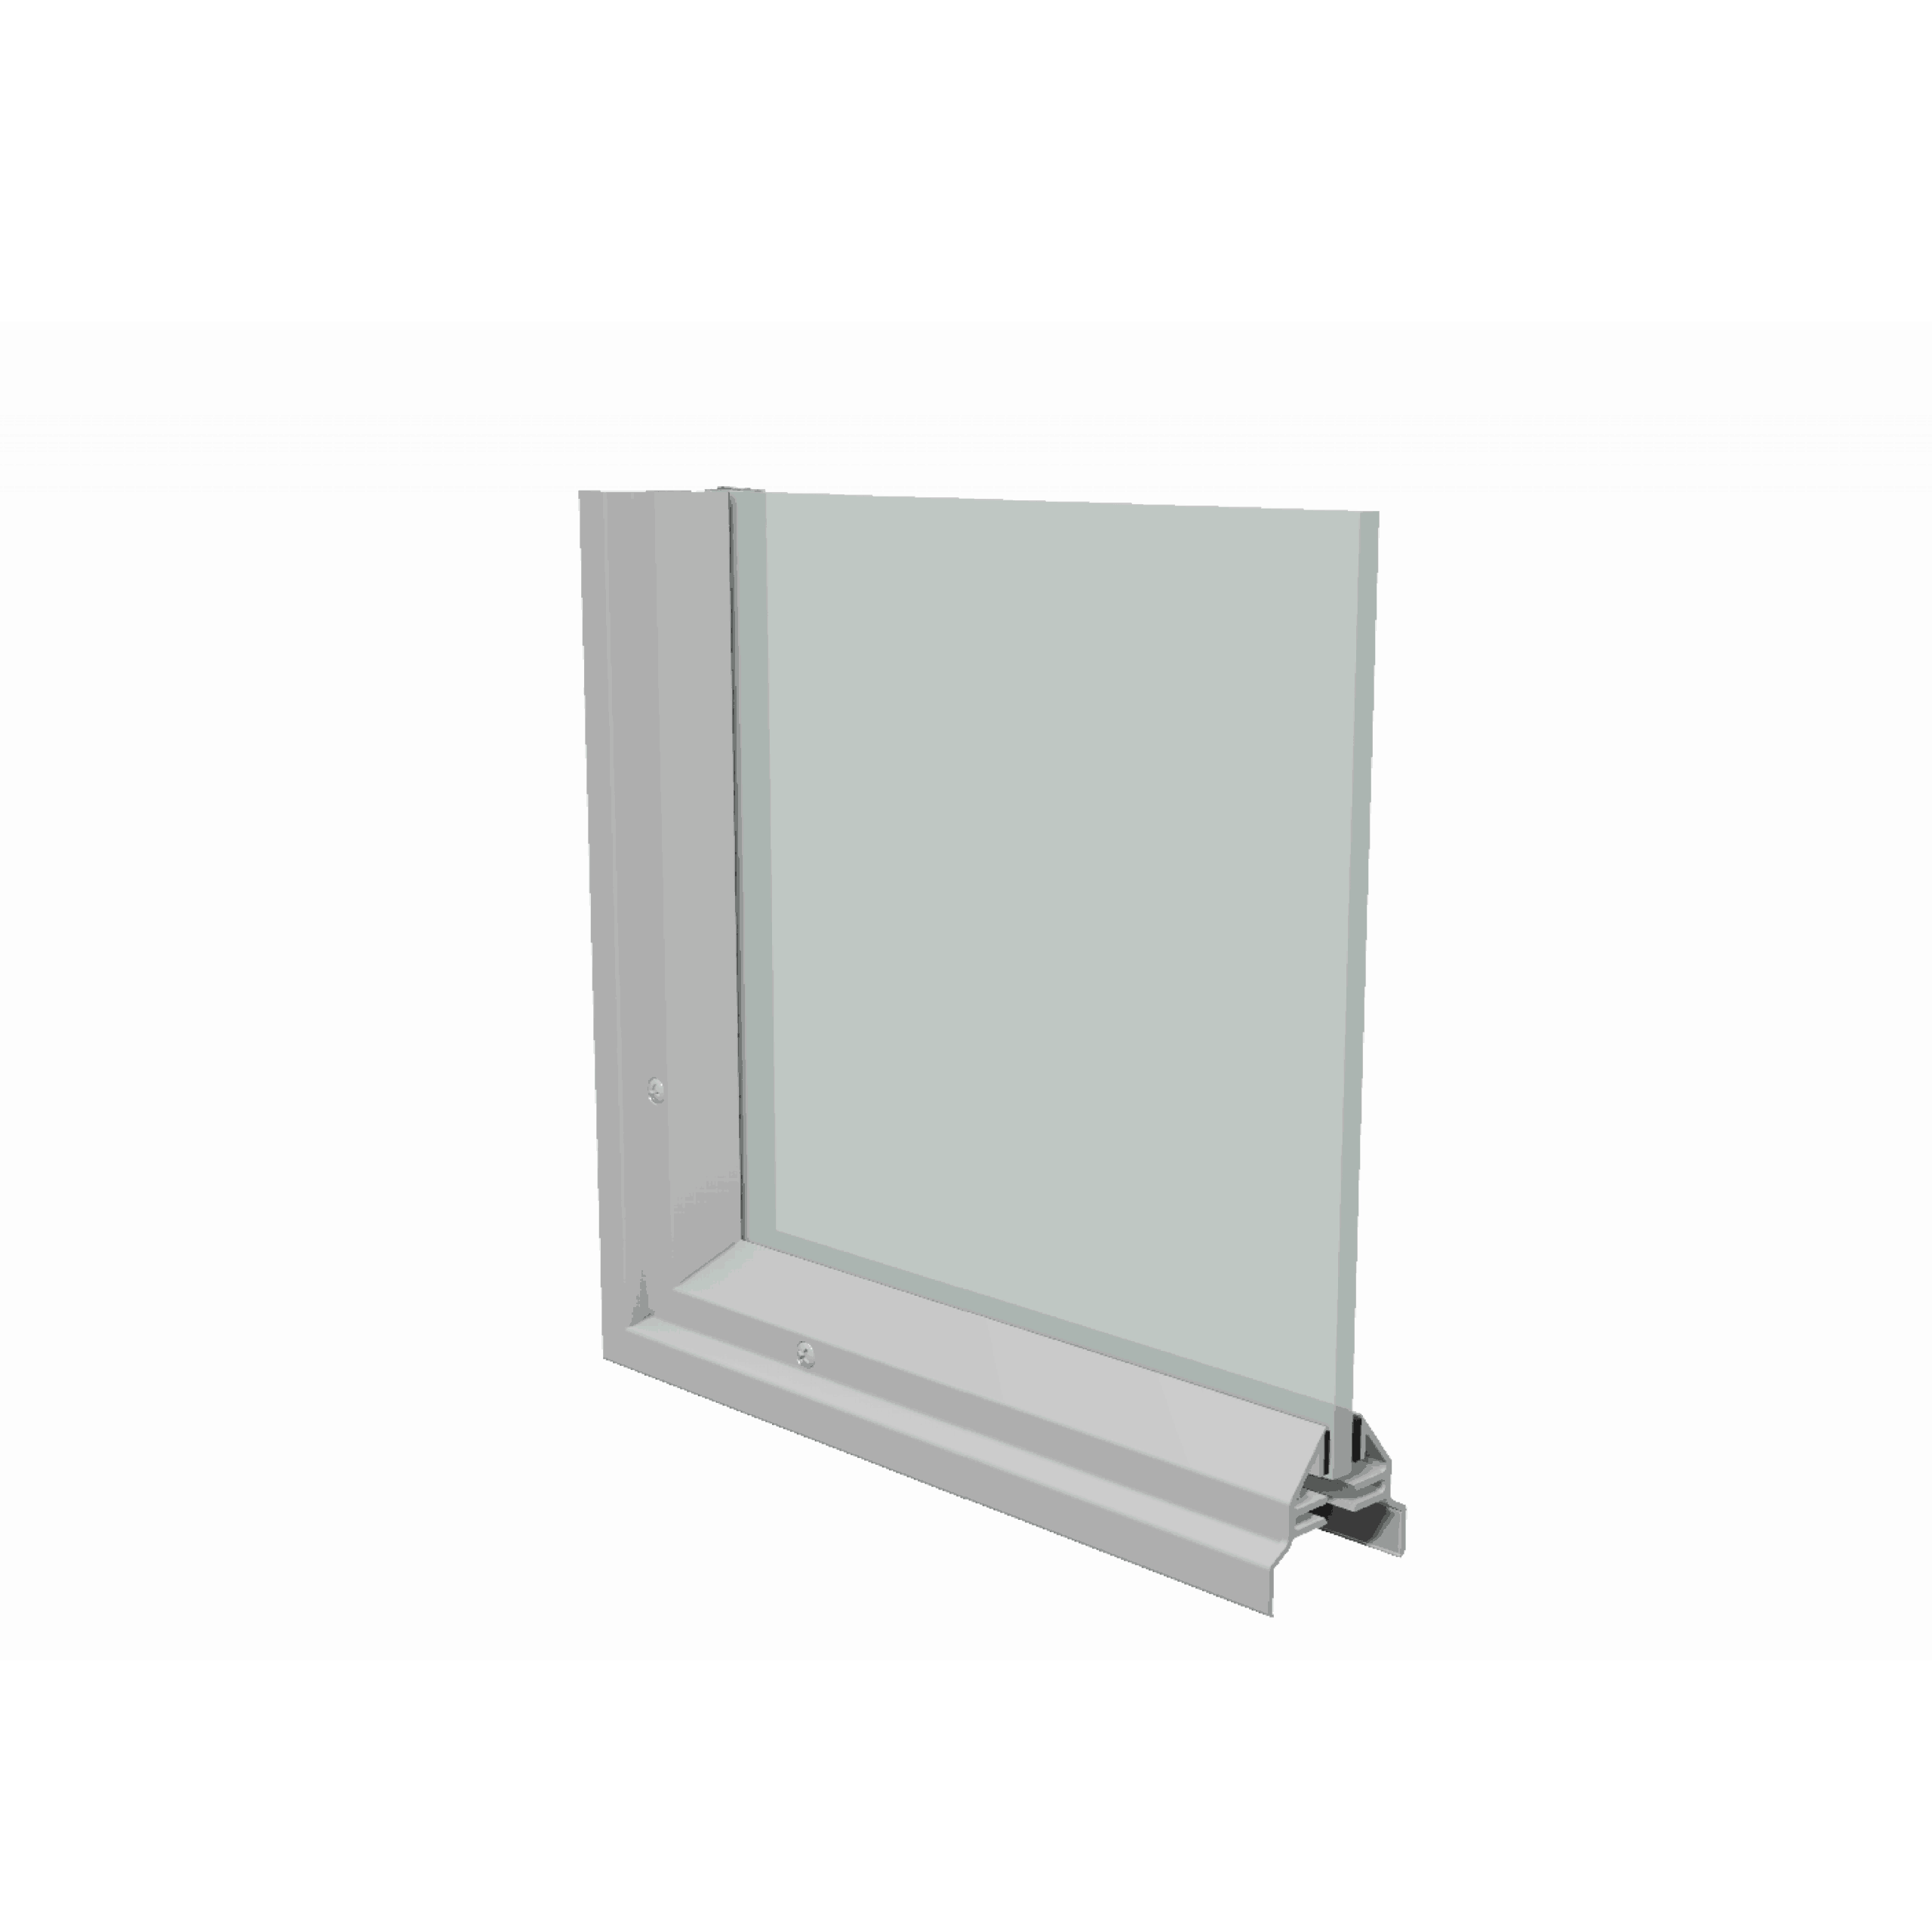 A sliding glass door with a frame on a white background.